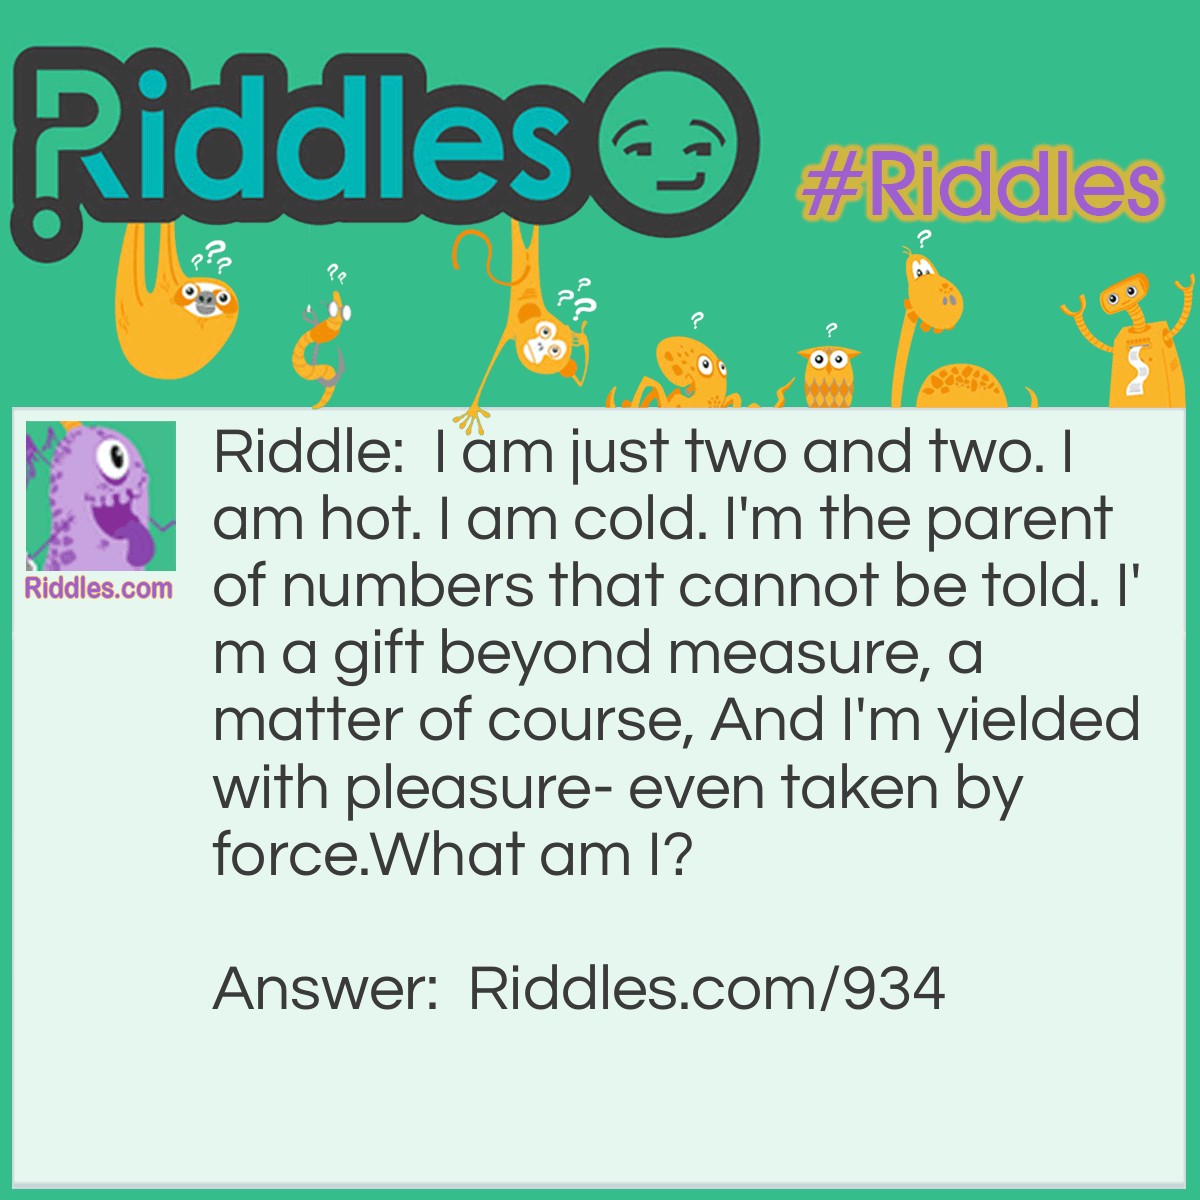 Riddle: I am just two and two. I am hot. I am cold. I'm the parent of numbers that cannot be told. I'm a gift beyond measure, a matter of course, And I'm yielded with pleasure- even taken by force.
What am I? Answer: I am a KISS.